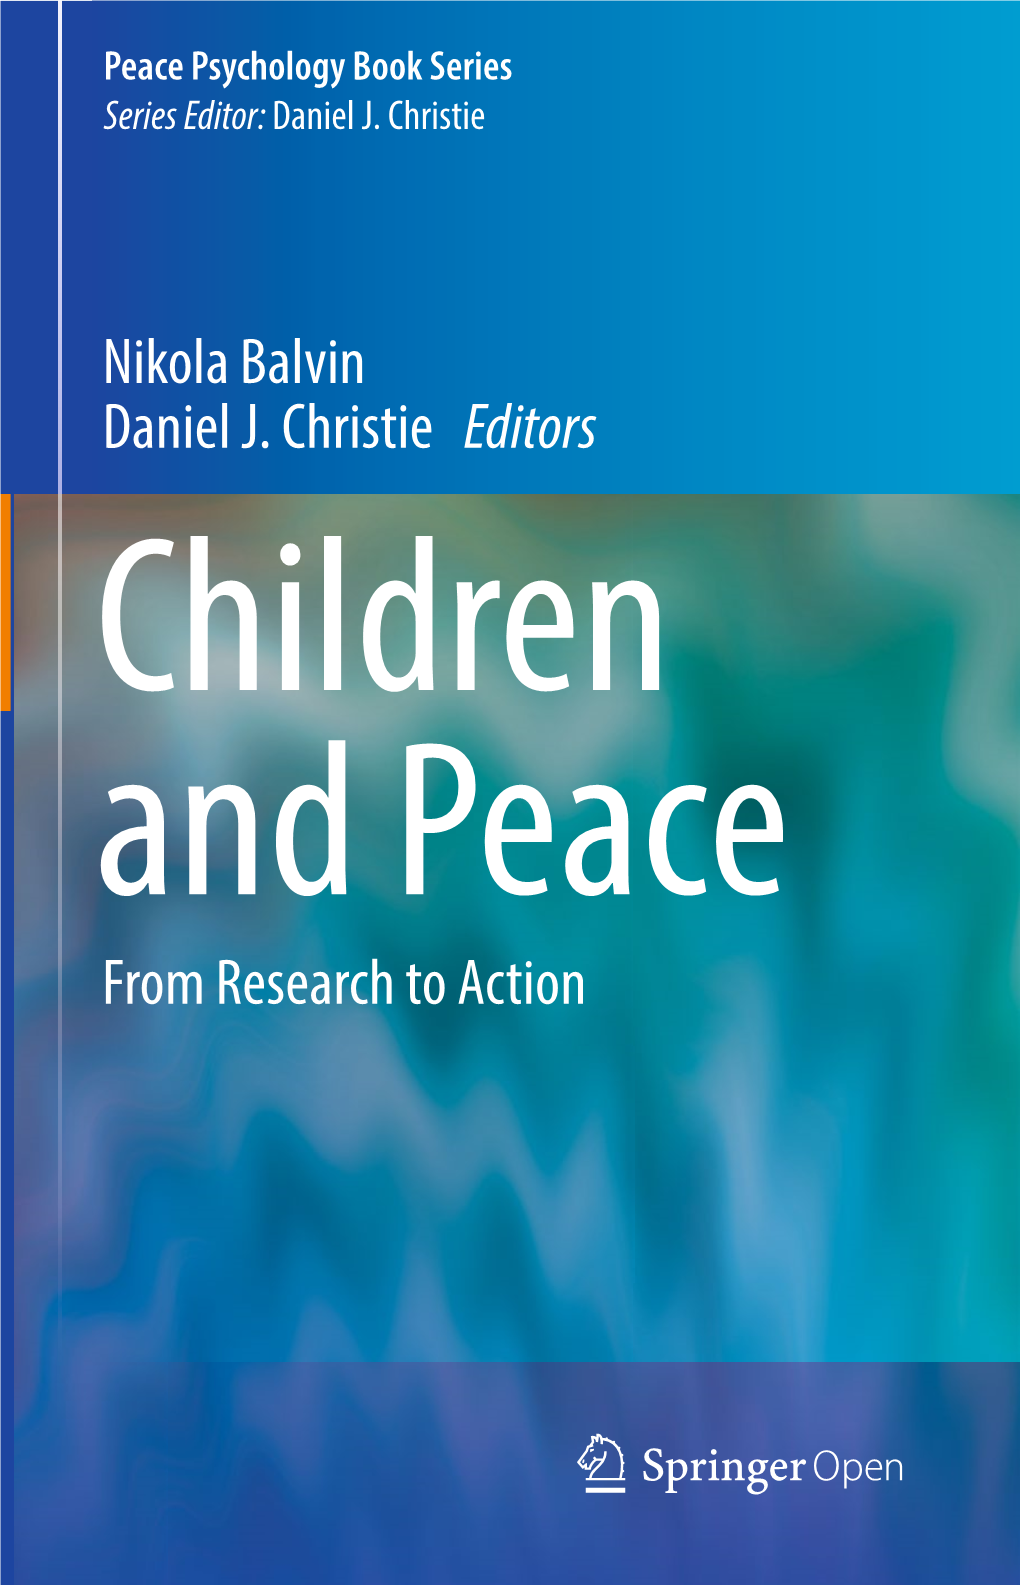 Nikola Balvin Daniel J. Christie Editors from Research to Action